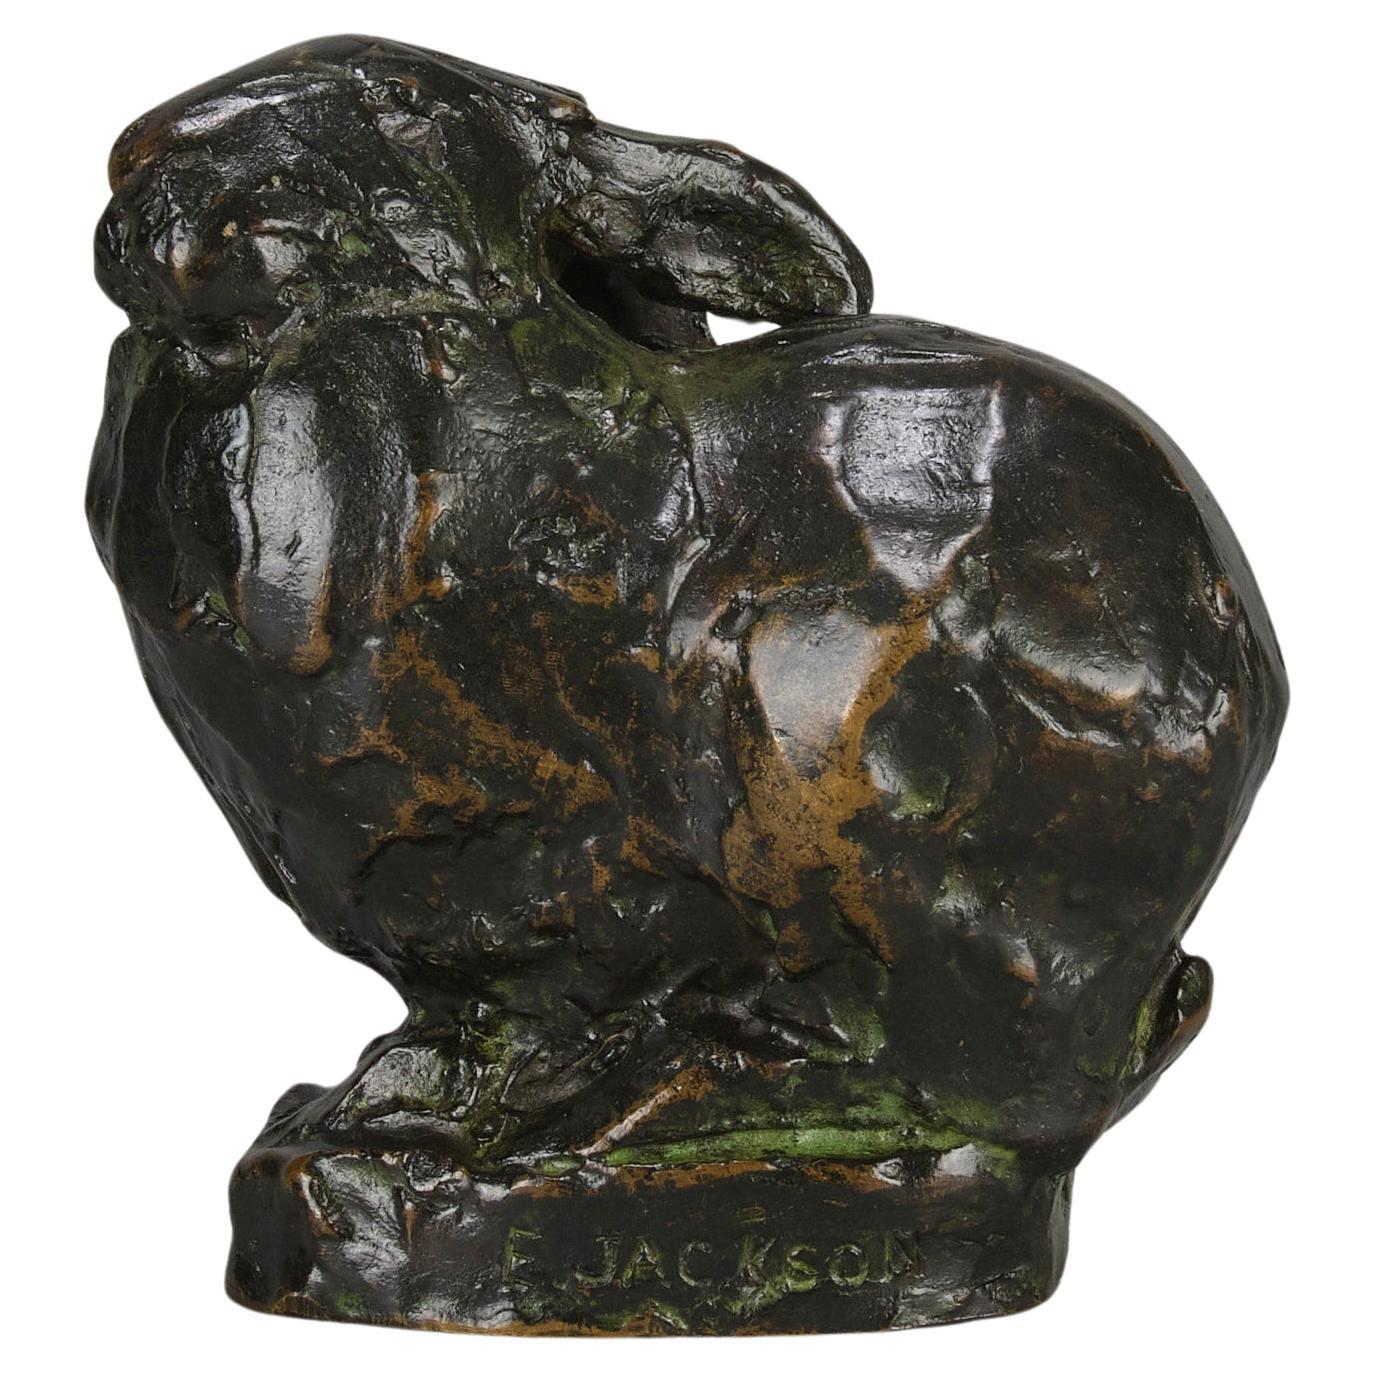 Early 20th Century Bronze Sculpture entitled "Seated Rabbit"  by Ernest Jackson